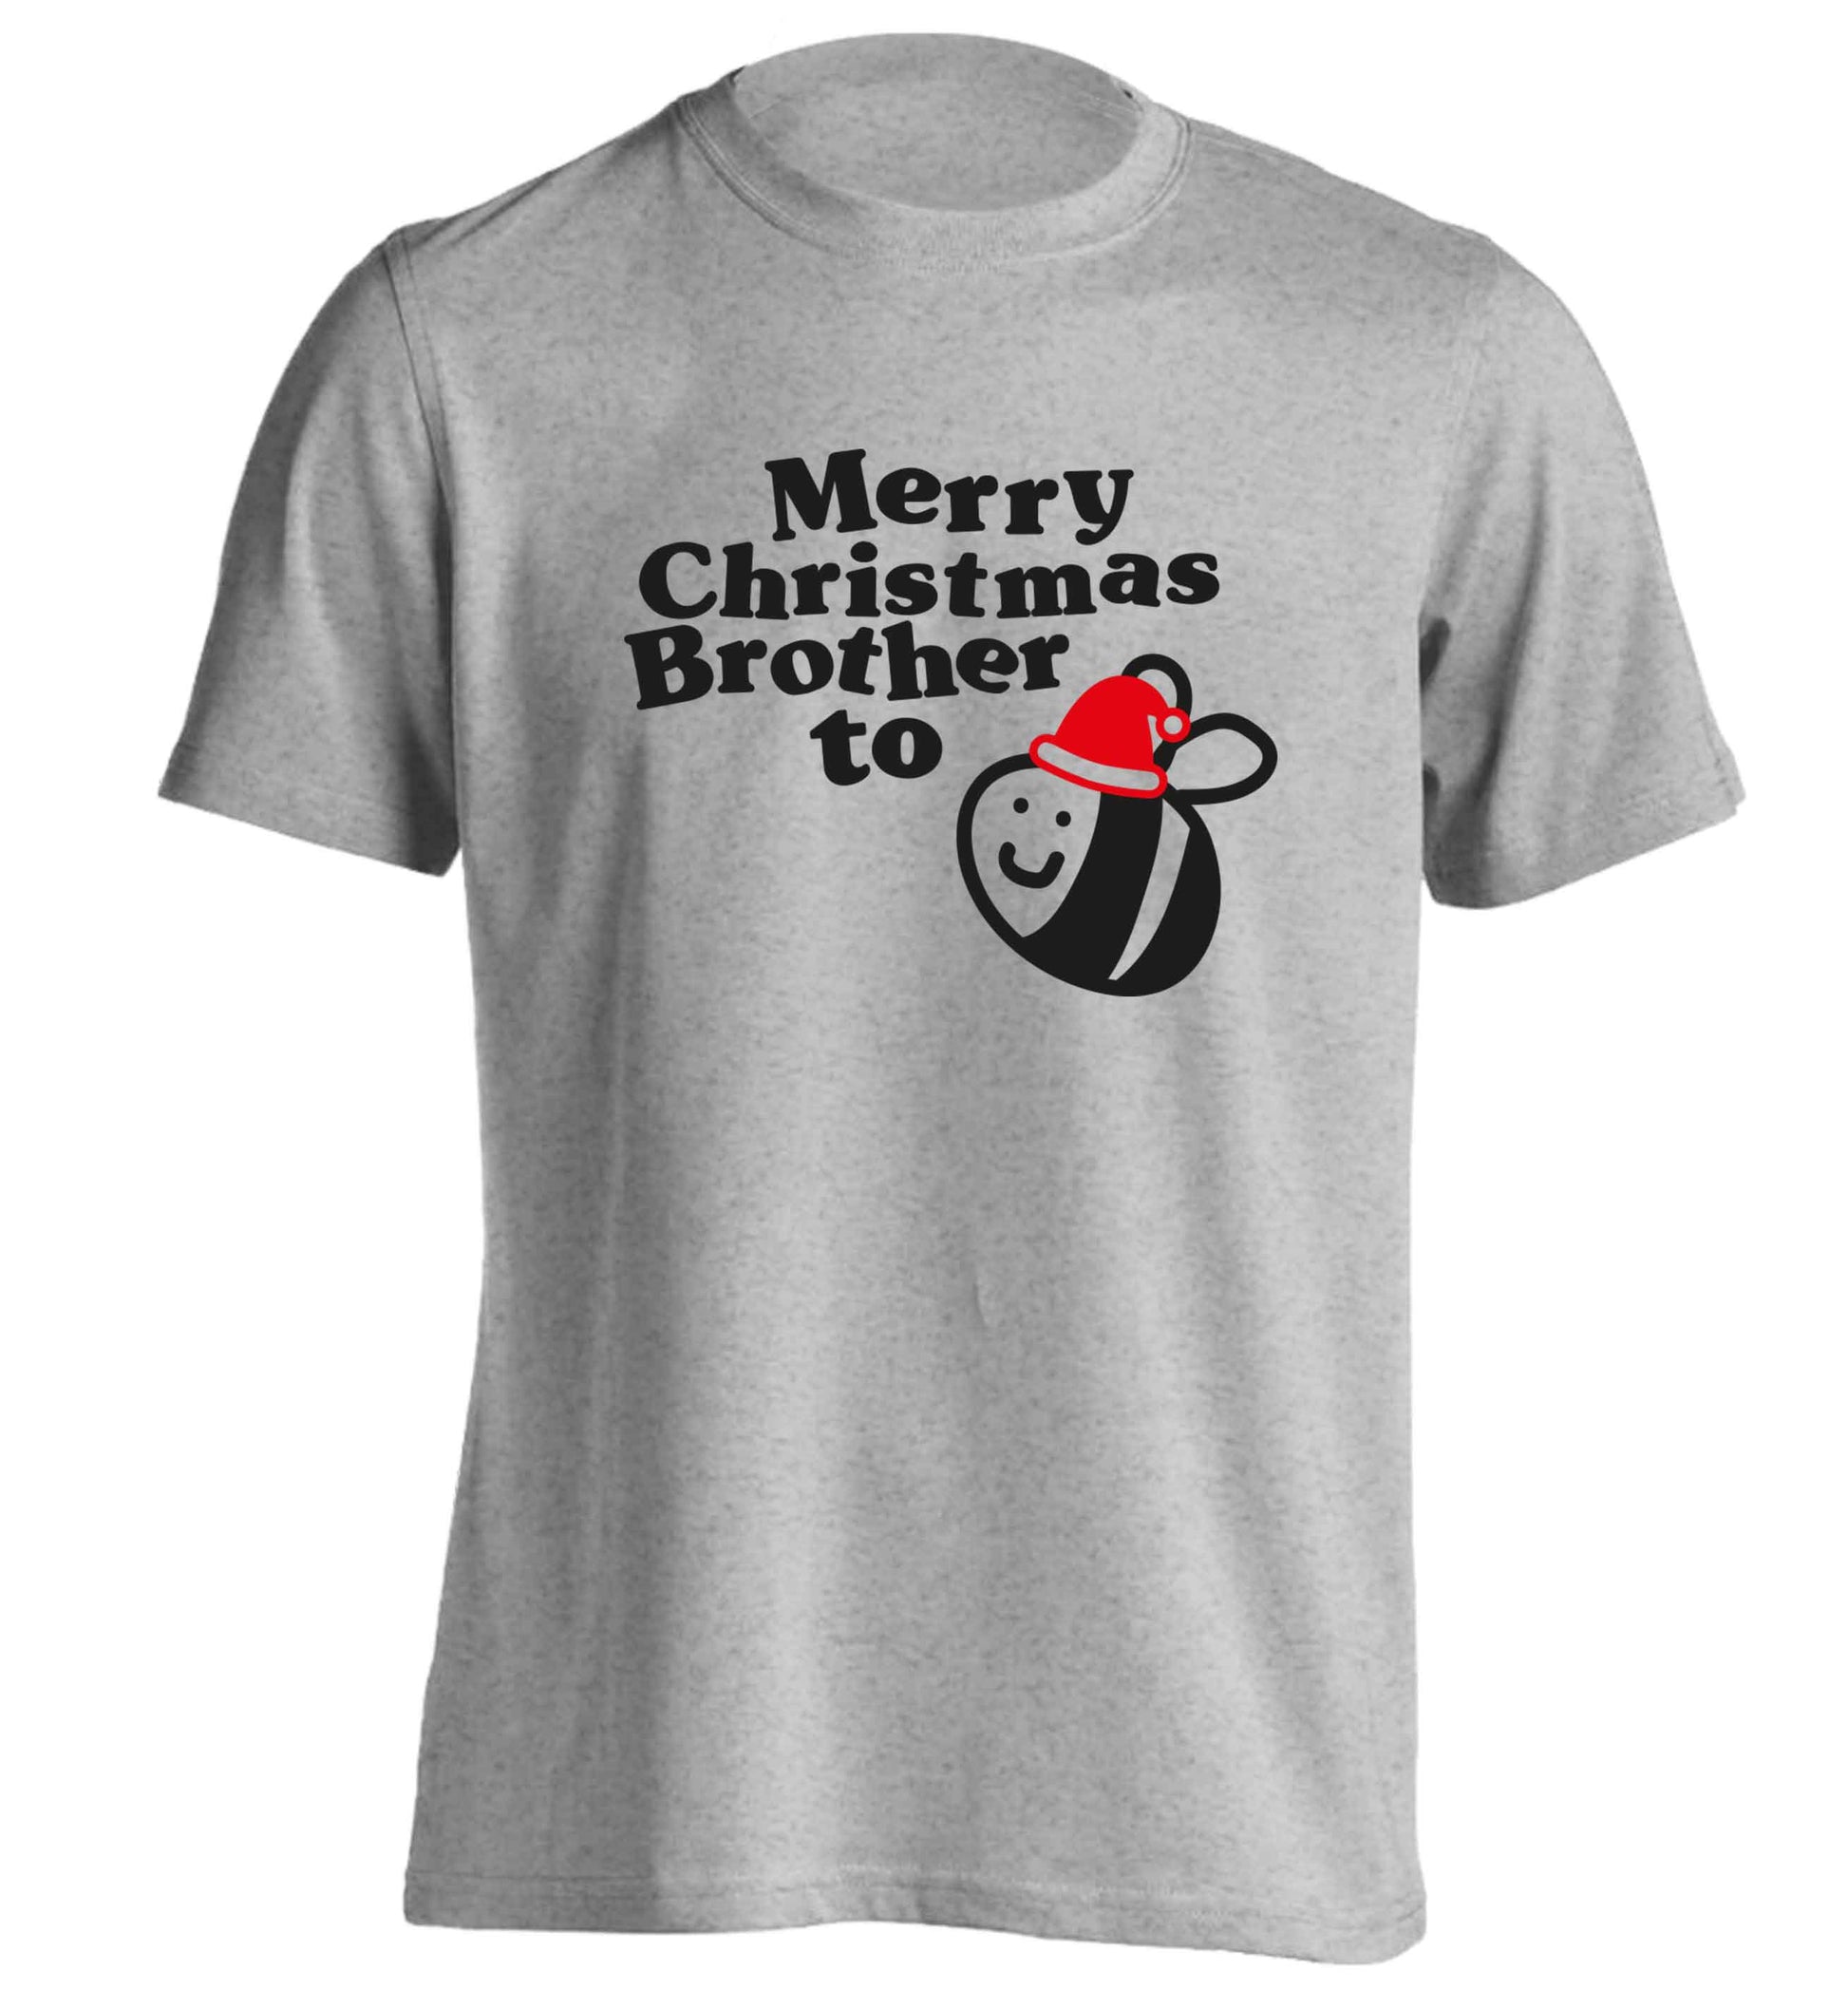 Merry Christmas brother to be adults unisex grey Tshirt 2XL